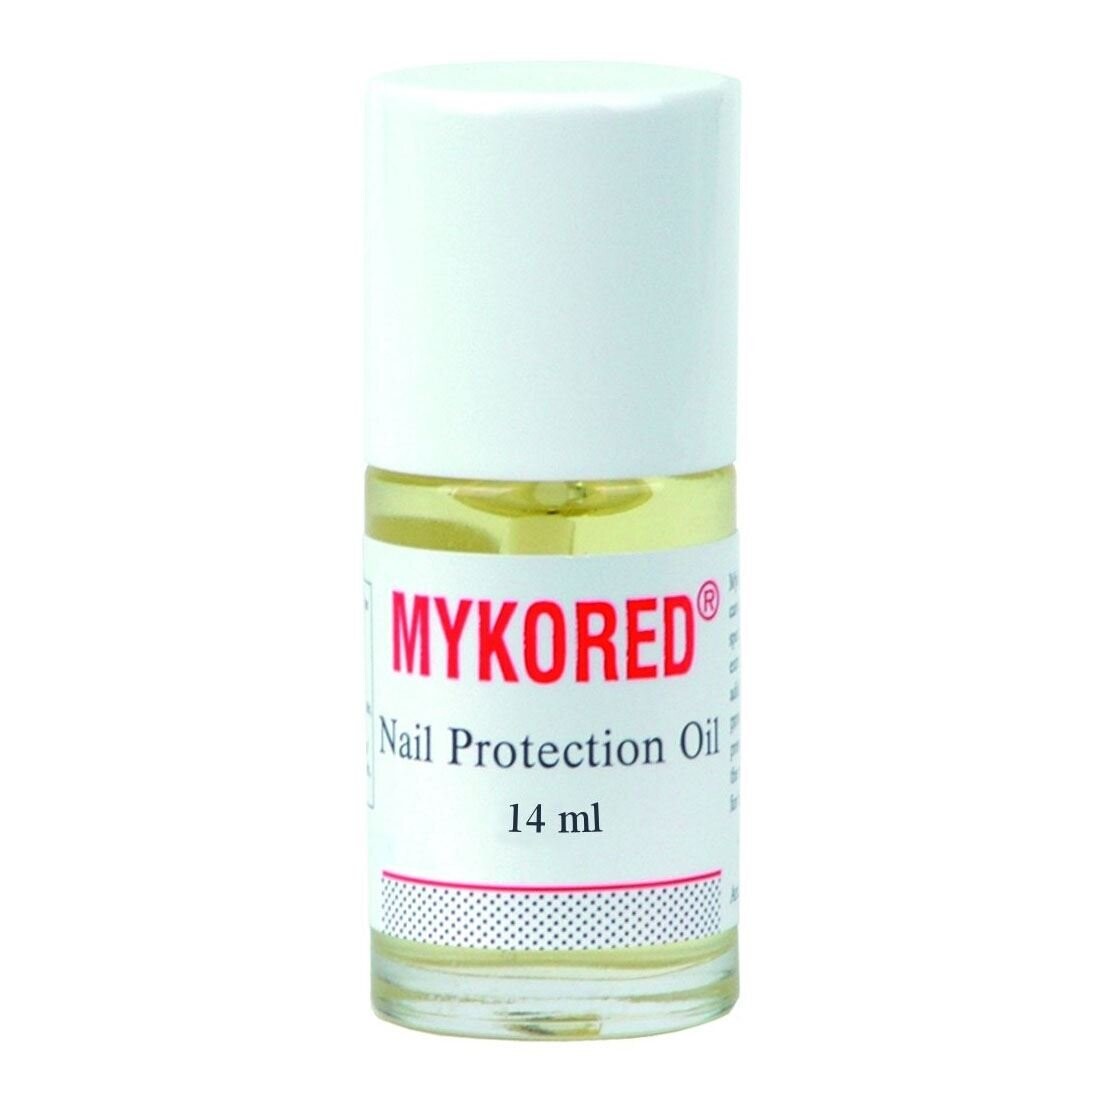 Mykored Nail Protection Oil